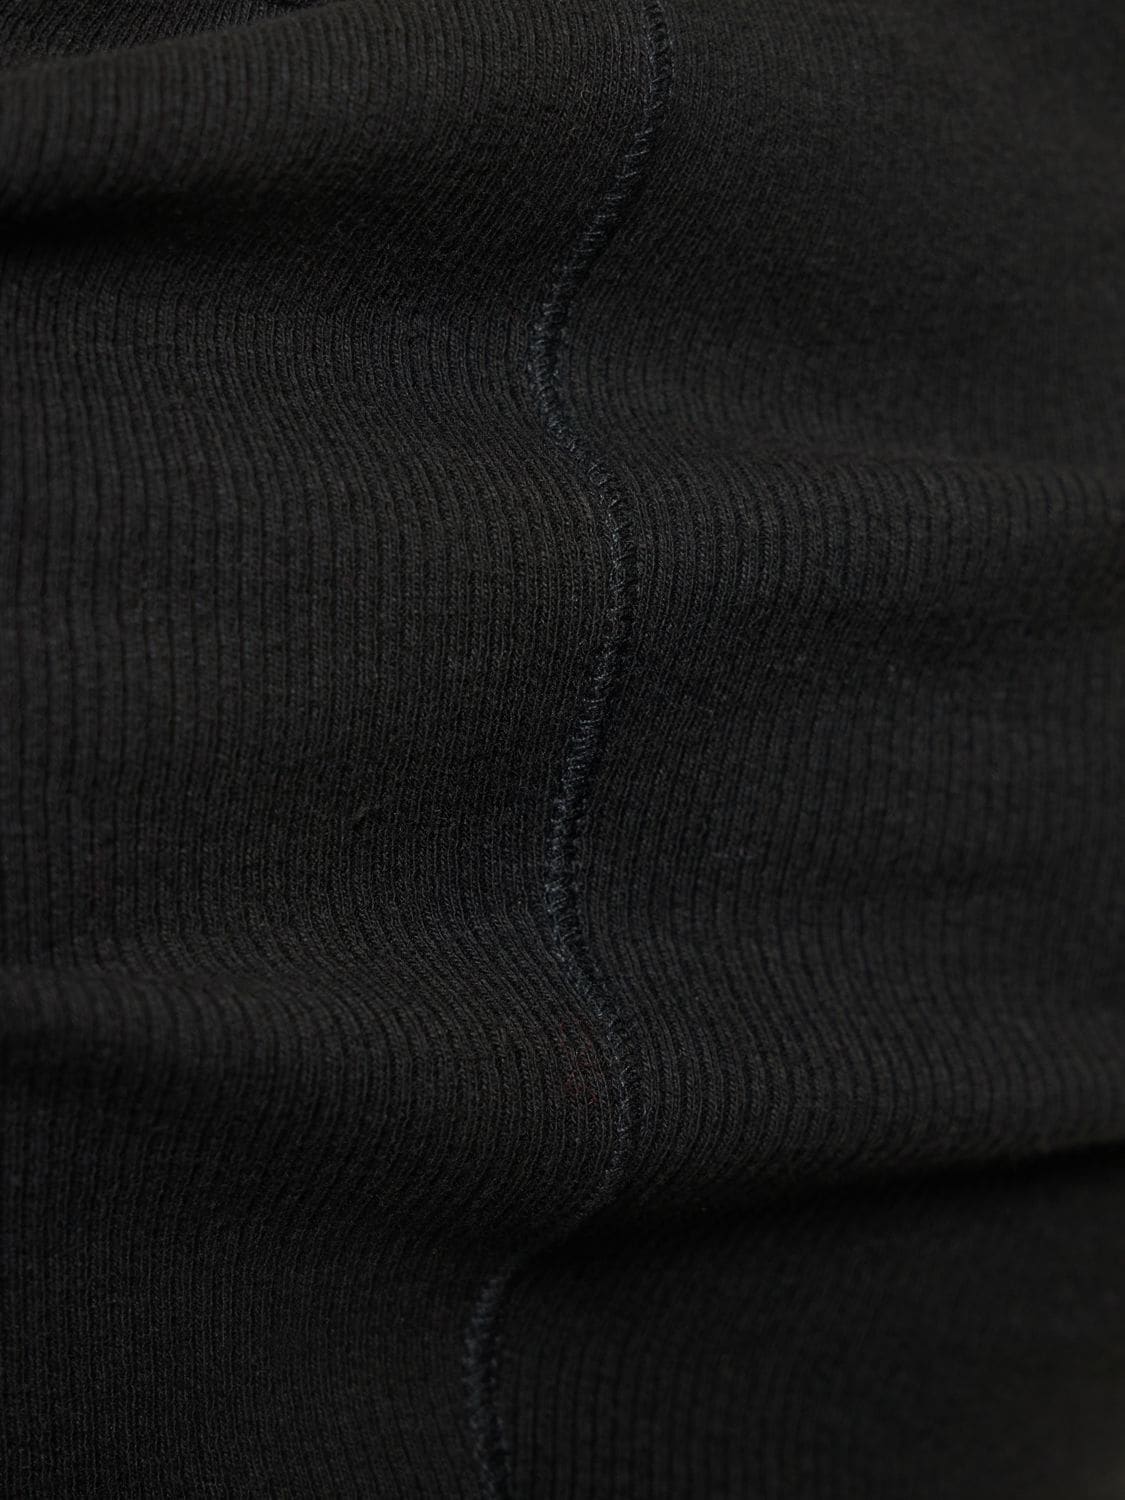 Shop Wardrobe.nyc Hb Stretch Cotton Ribbed Tank Top In Black